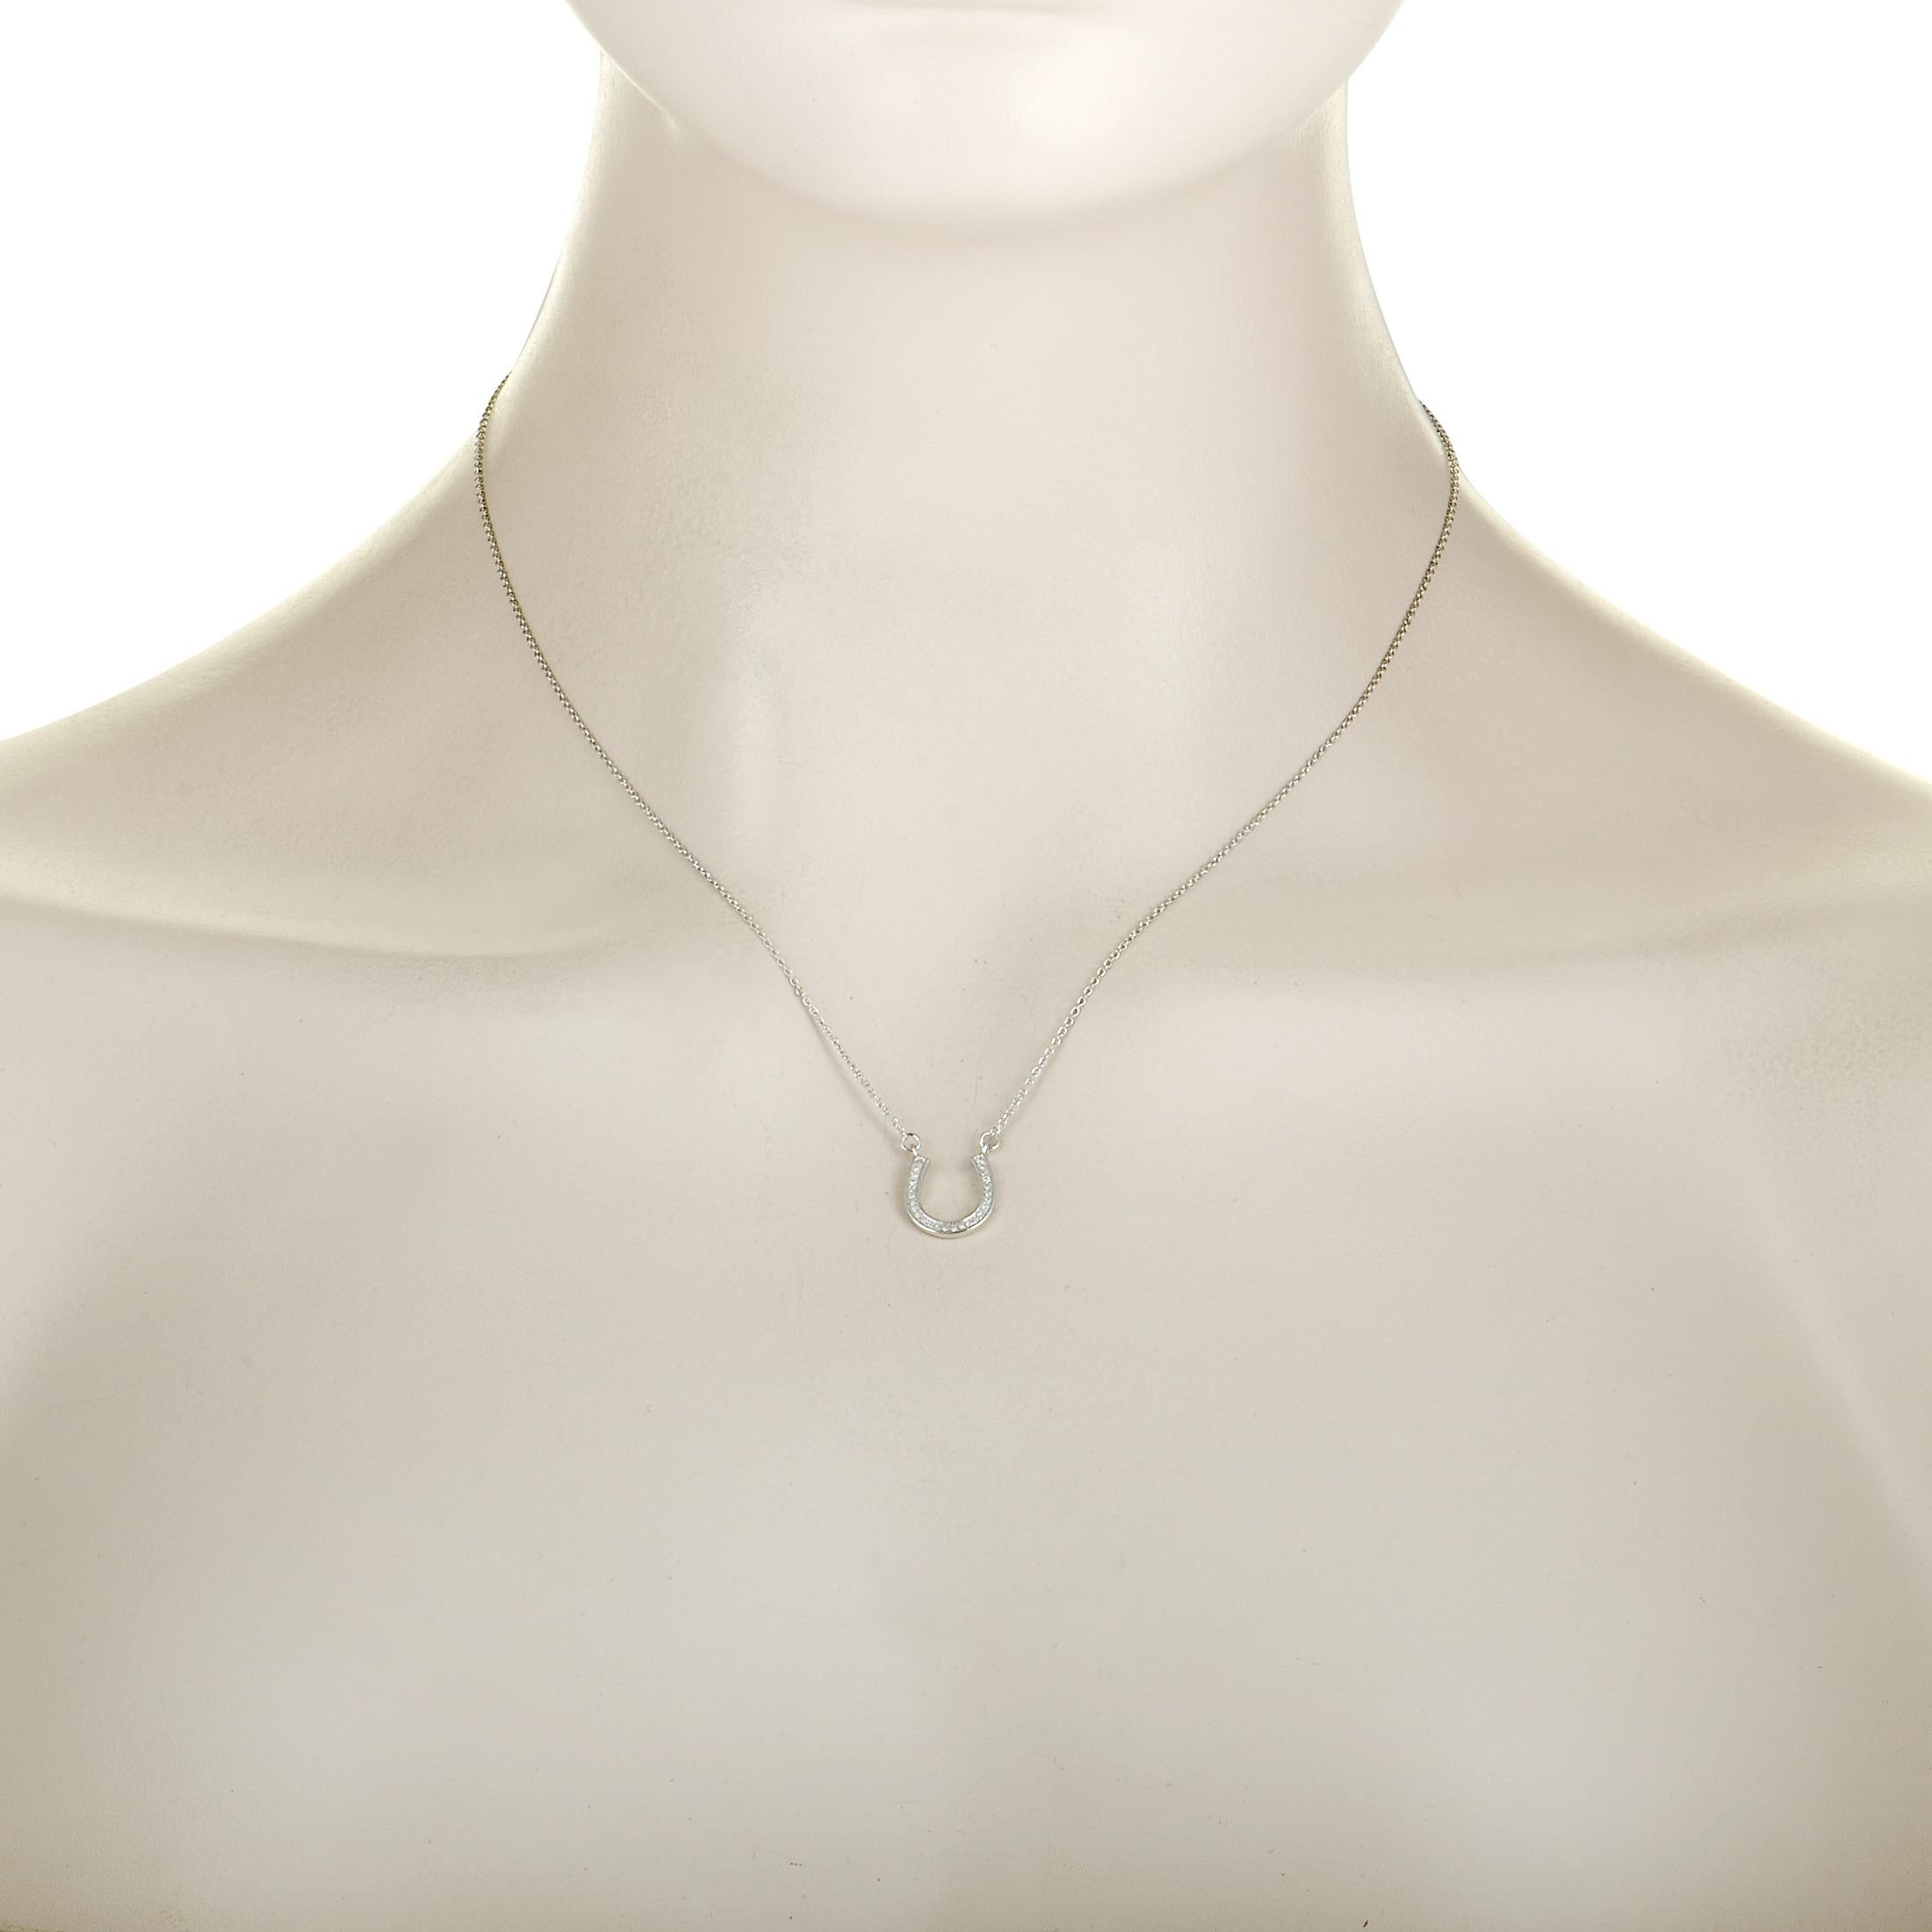 This necklace is crafted from 14K white gold and weighs 2.4 grams, boasting chain length of 17.00” while the pendant measures 0.55” by 0.45”. The necklace is set with diamonds that weigh 0.10 carats in total.
 
 Offered in brand new condition, this